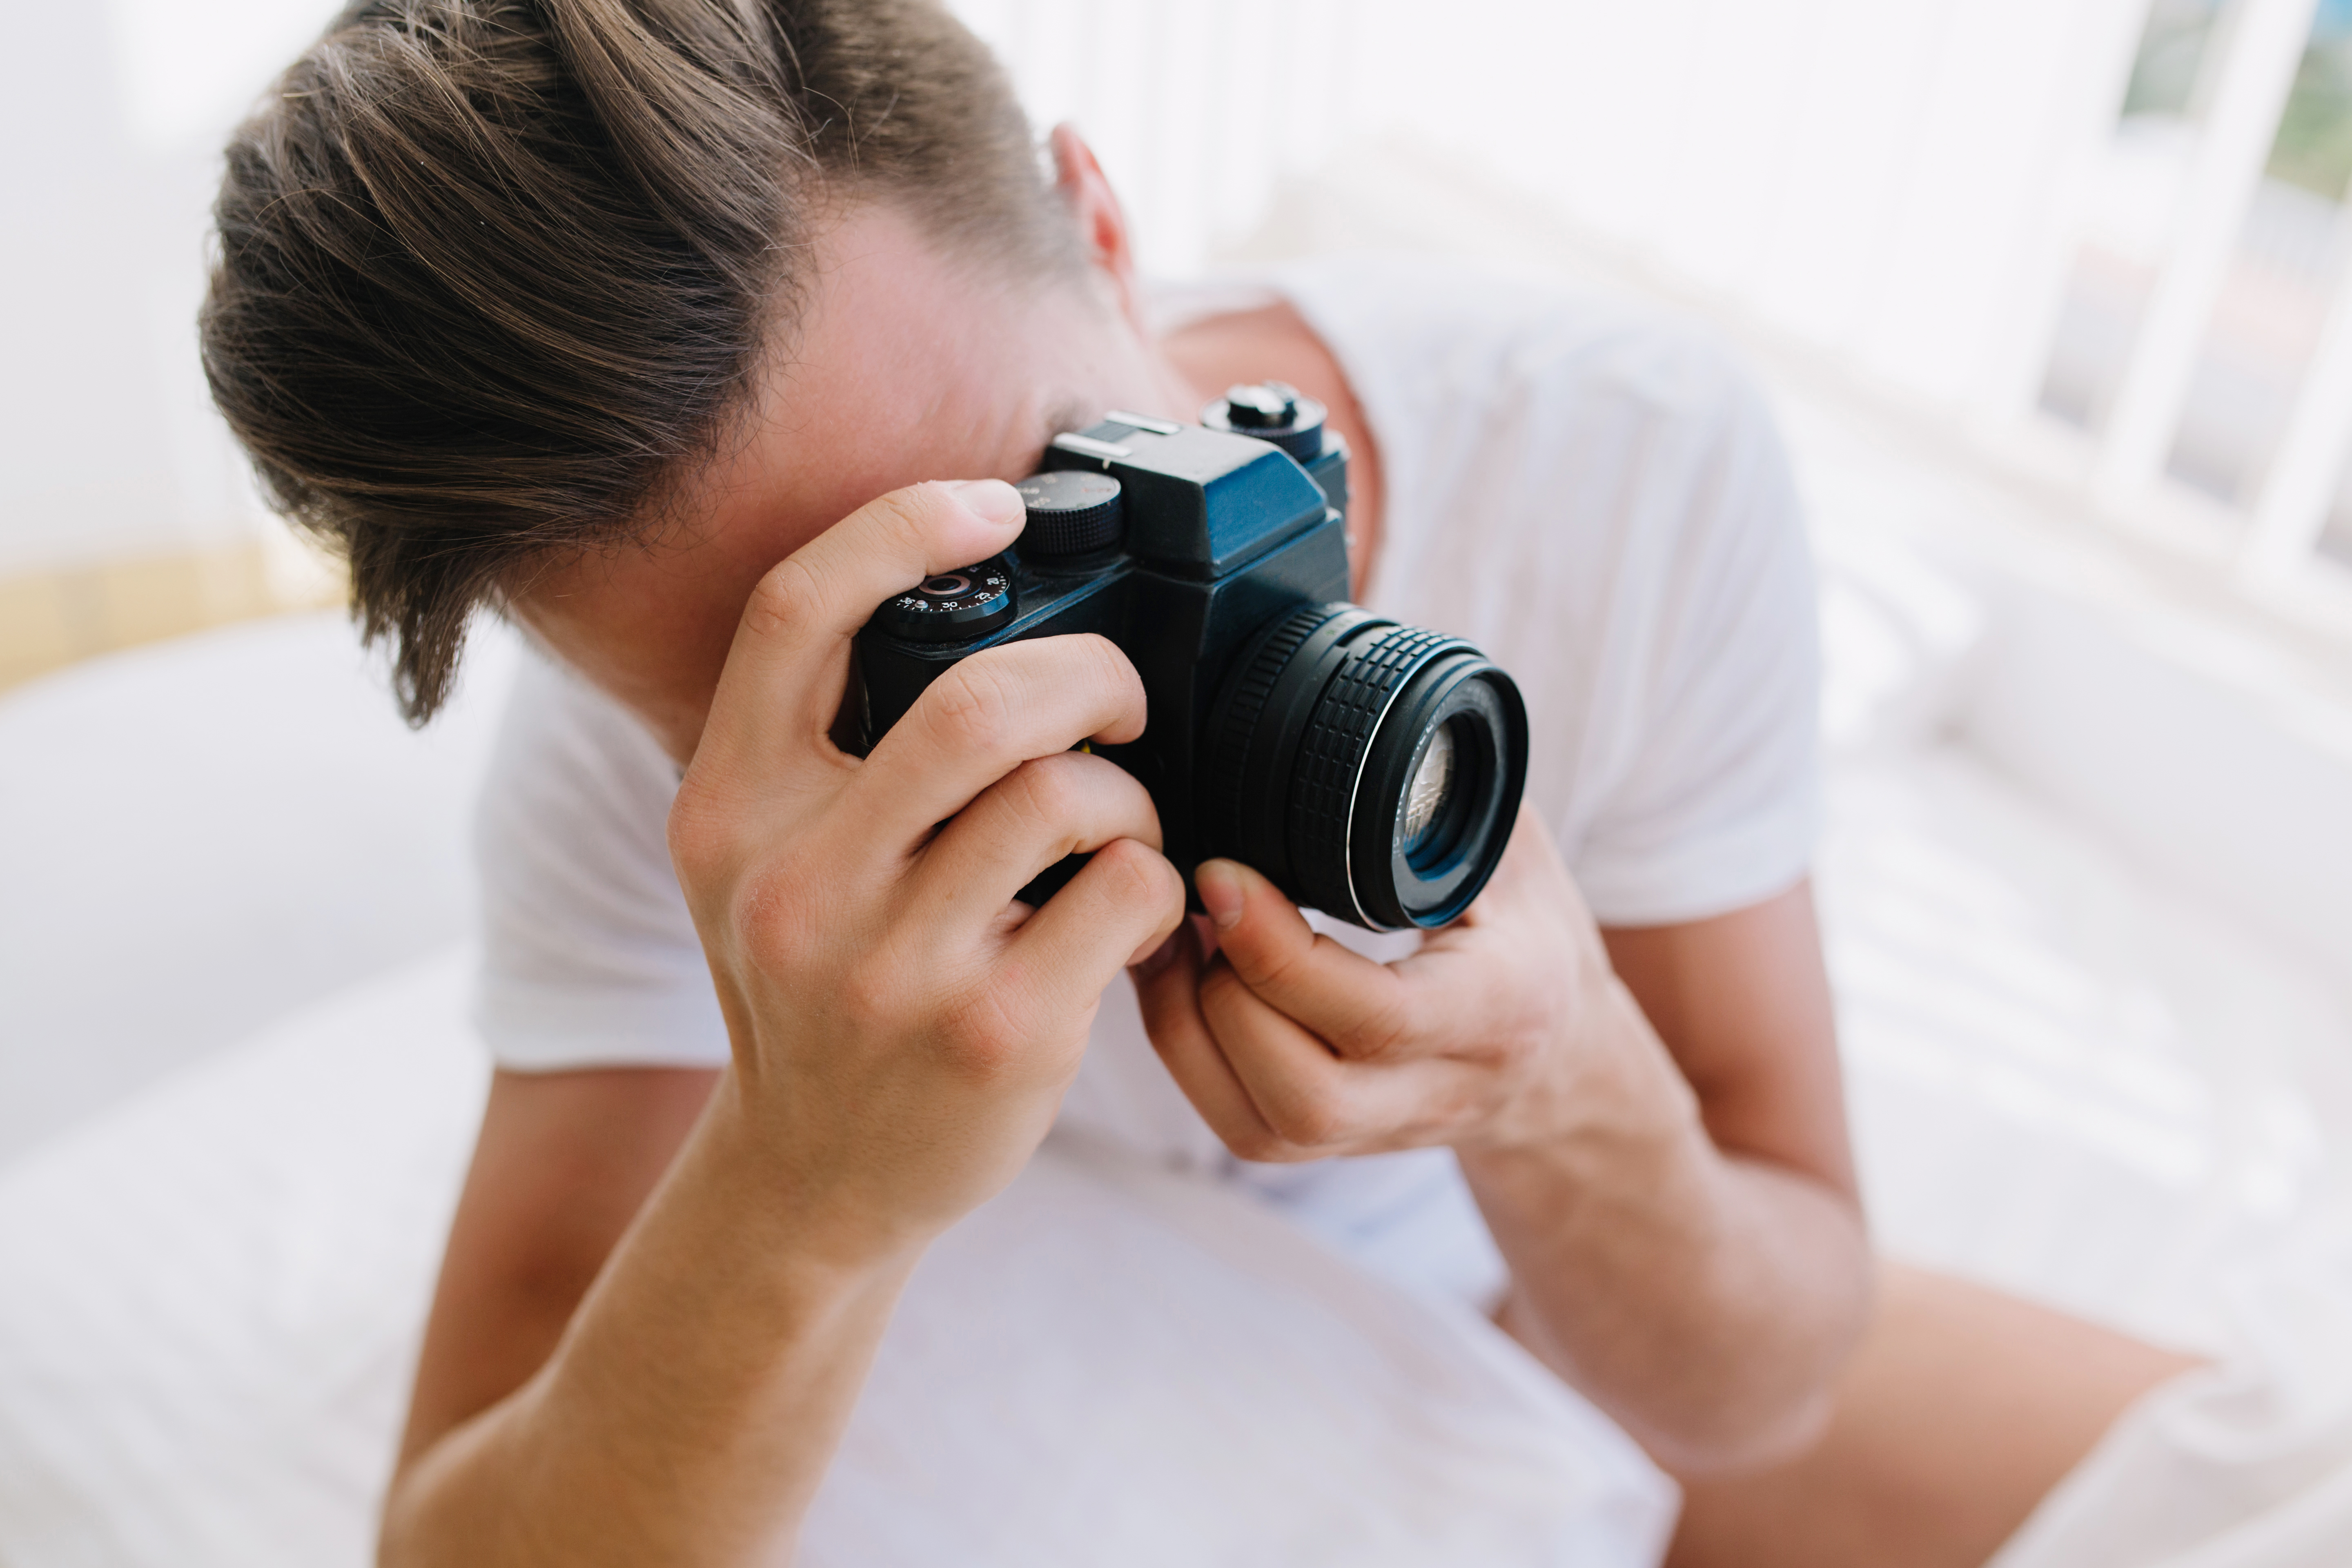 Close up portrait young man with trendy hairstyle holding professional camera hands guy with dark short hair white shirt making new photos portfolio sunny morning